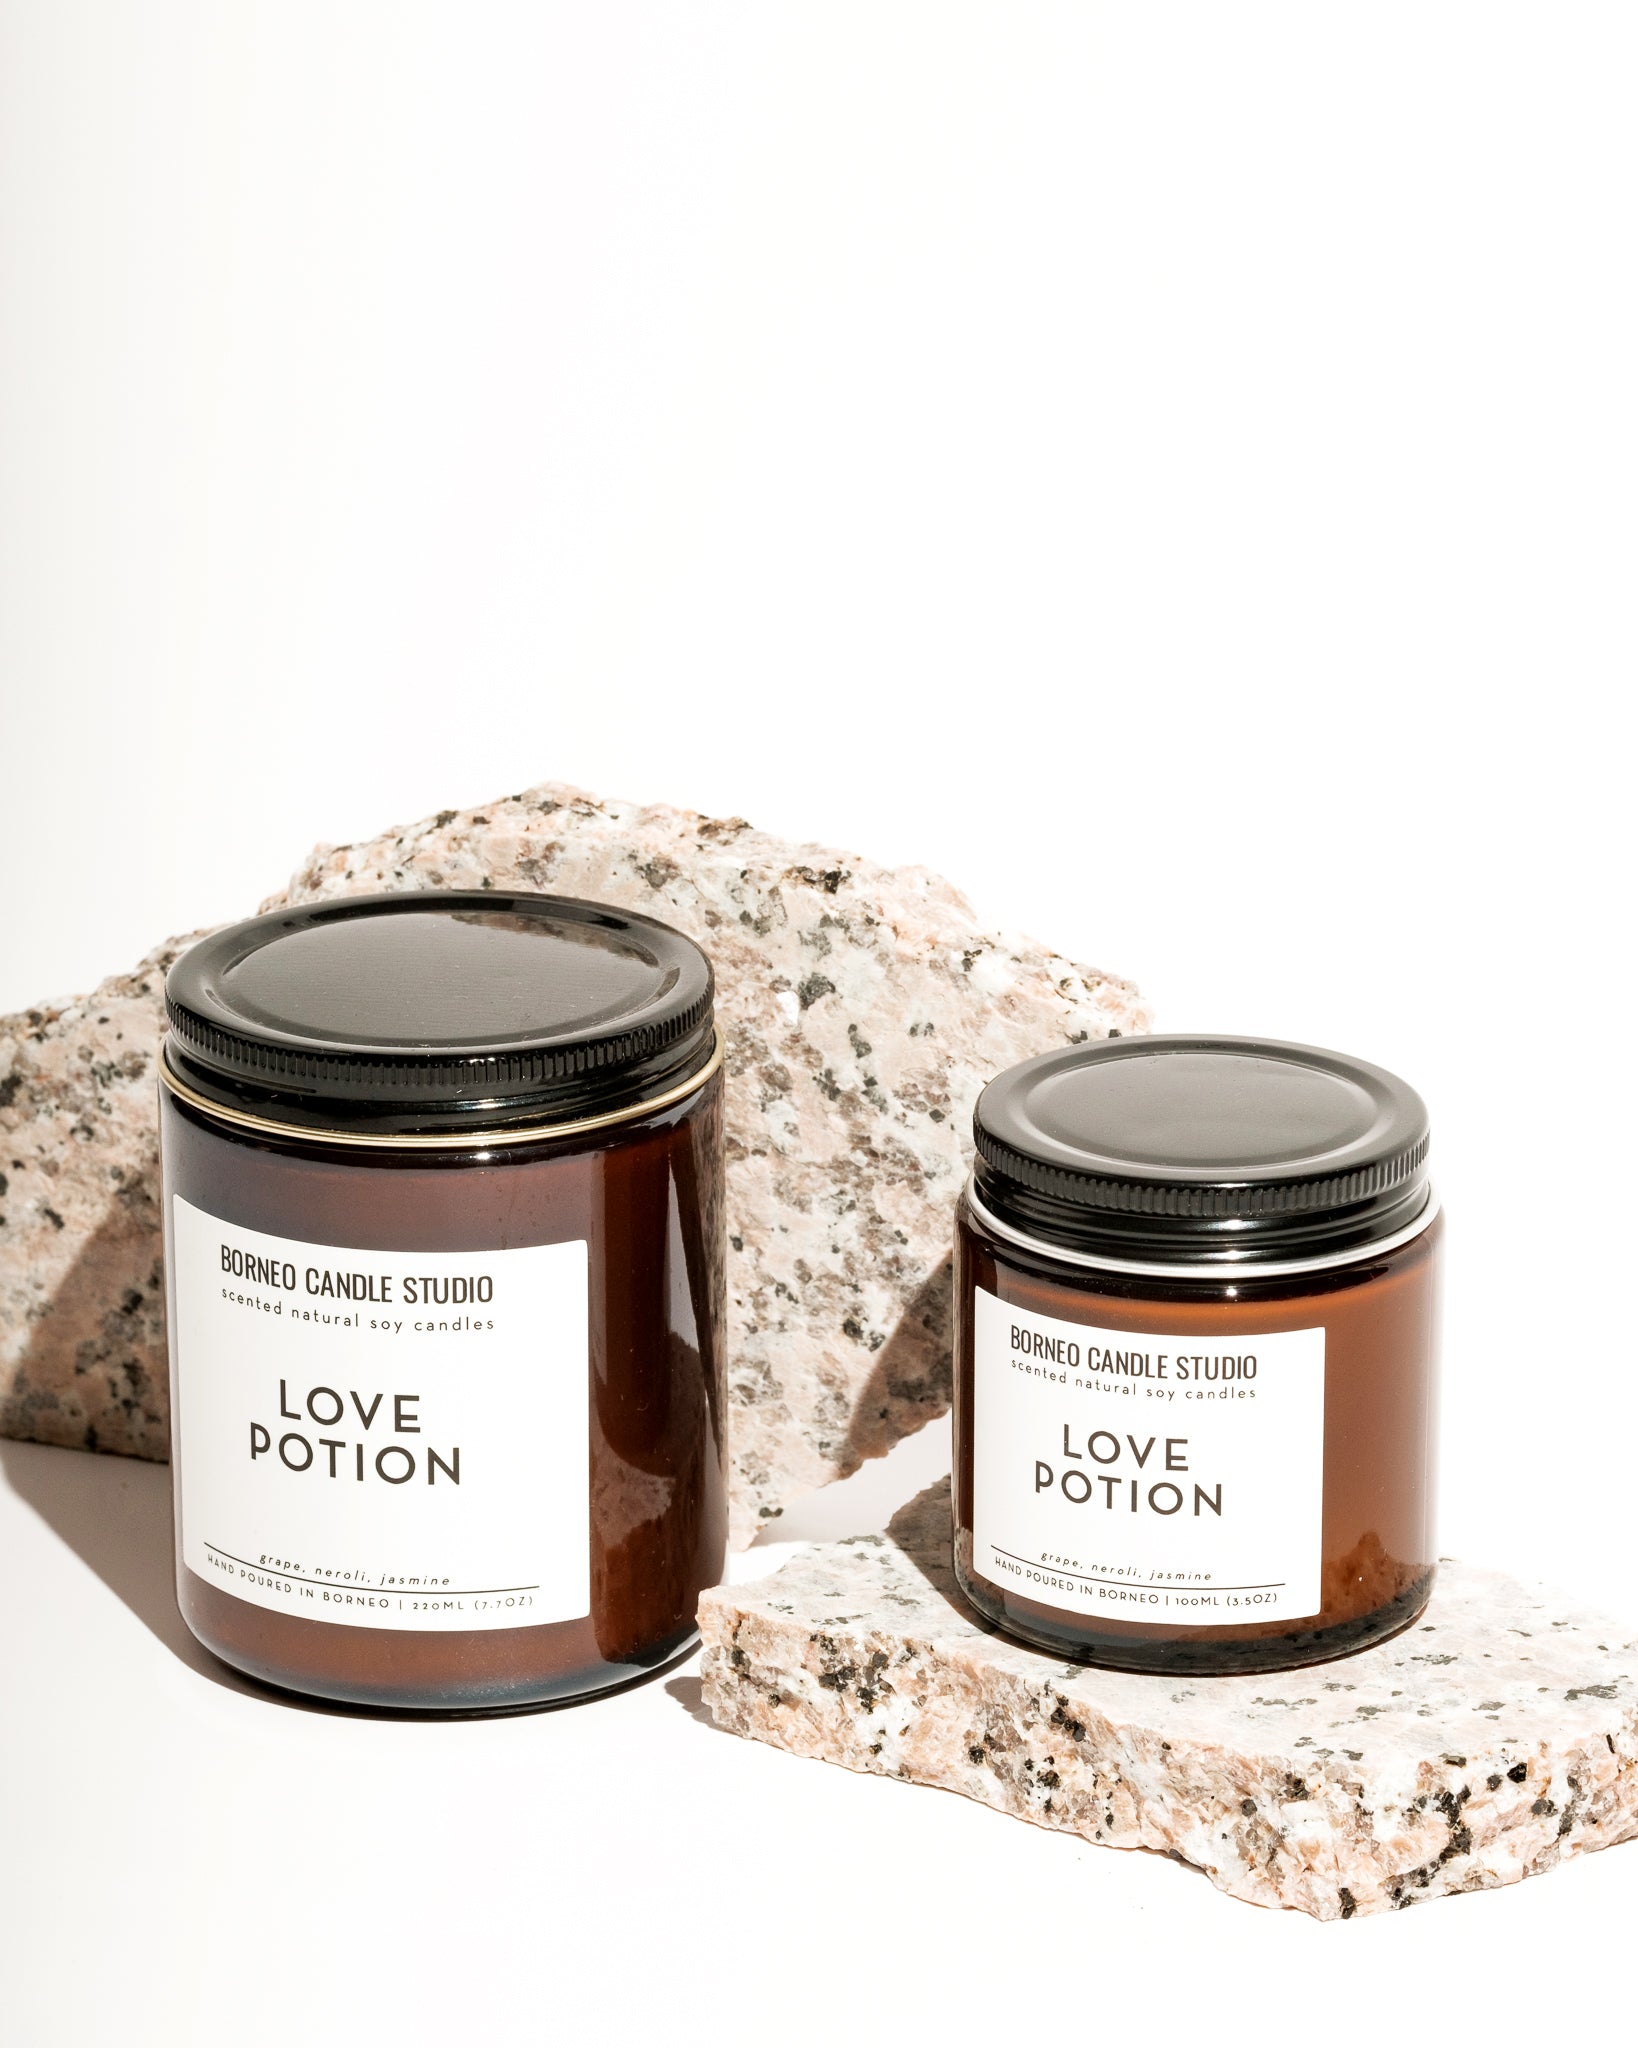 Borneo Candle Studio, a Bruneian and Malaysian home fragrance brand makes 100% scented soy candles comes in 2 sizes.